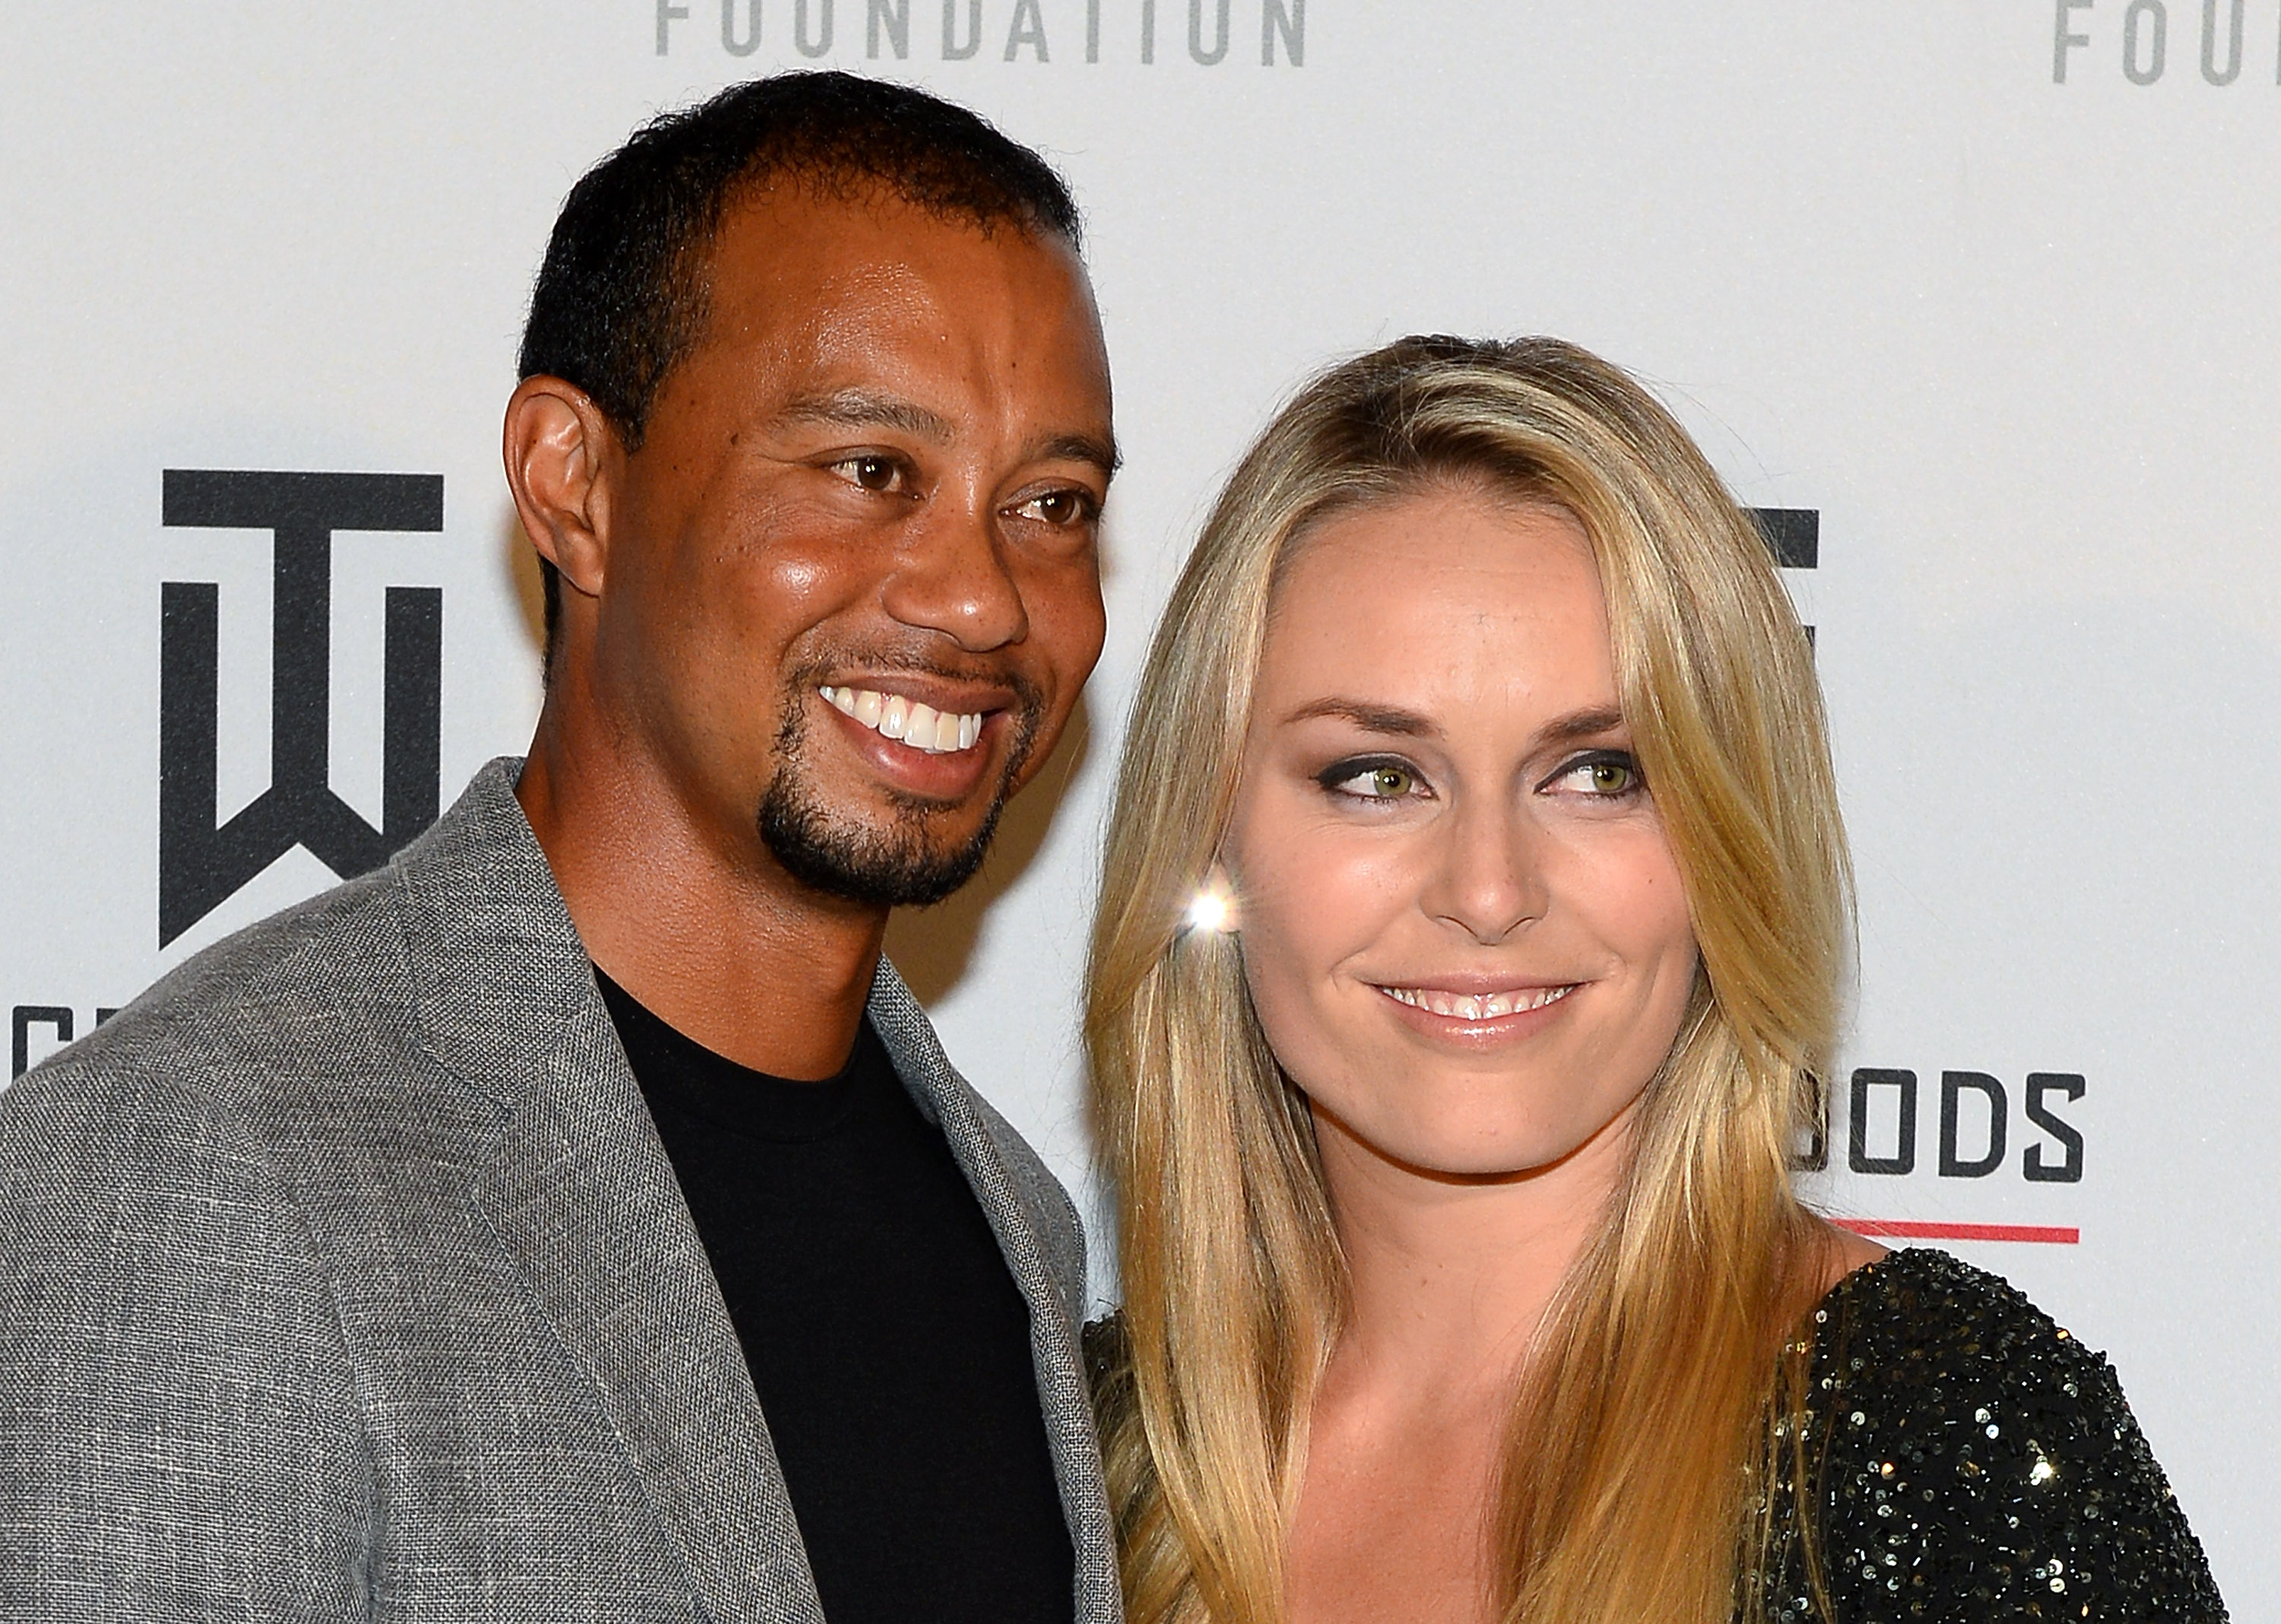 Nude Photos of Tiger Woods and Lindsey Vonn Leaked photo